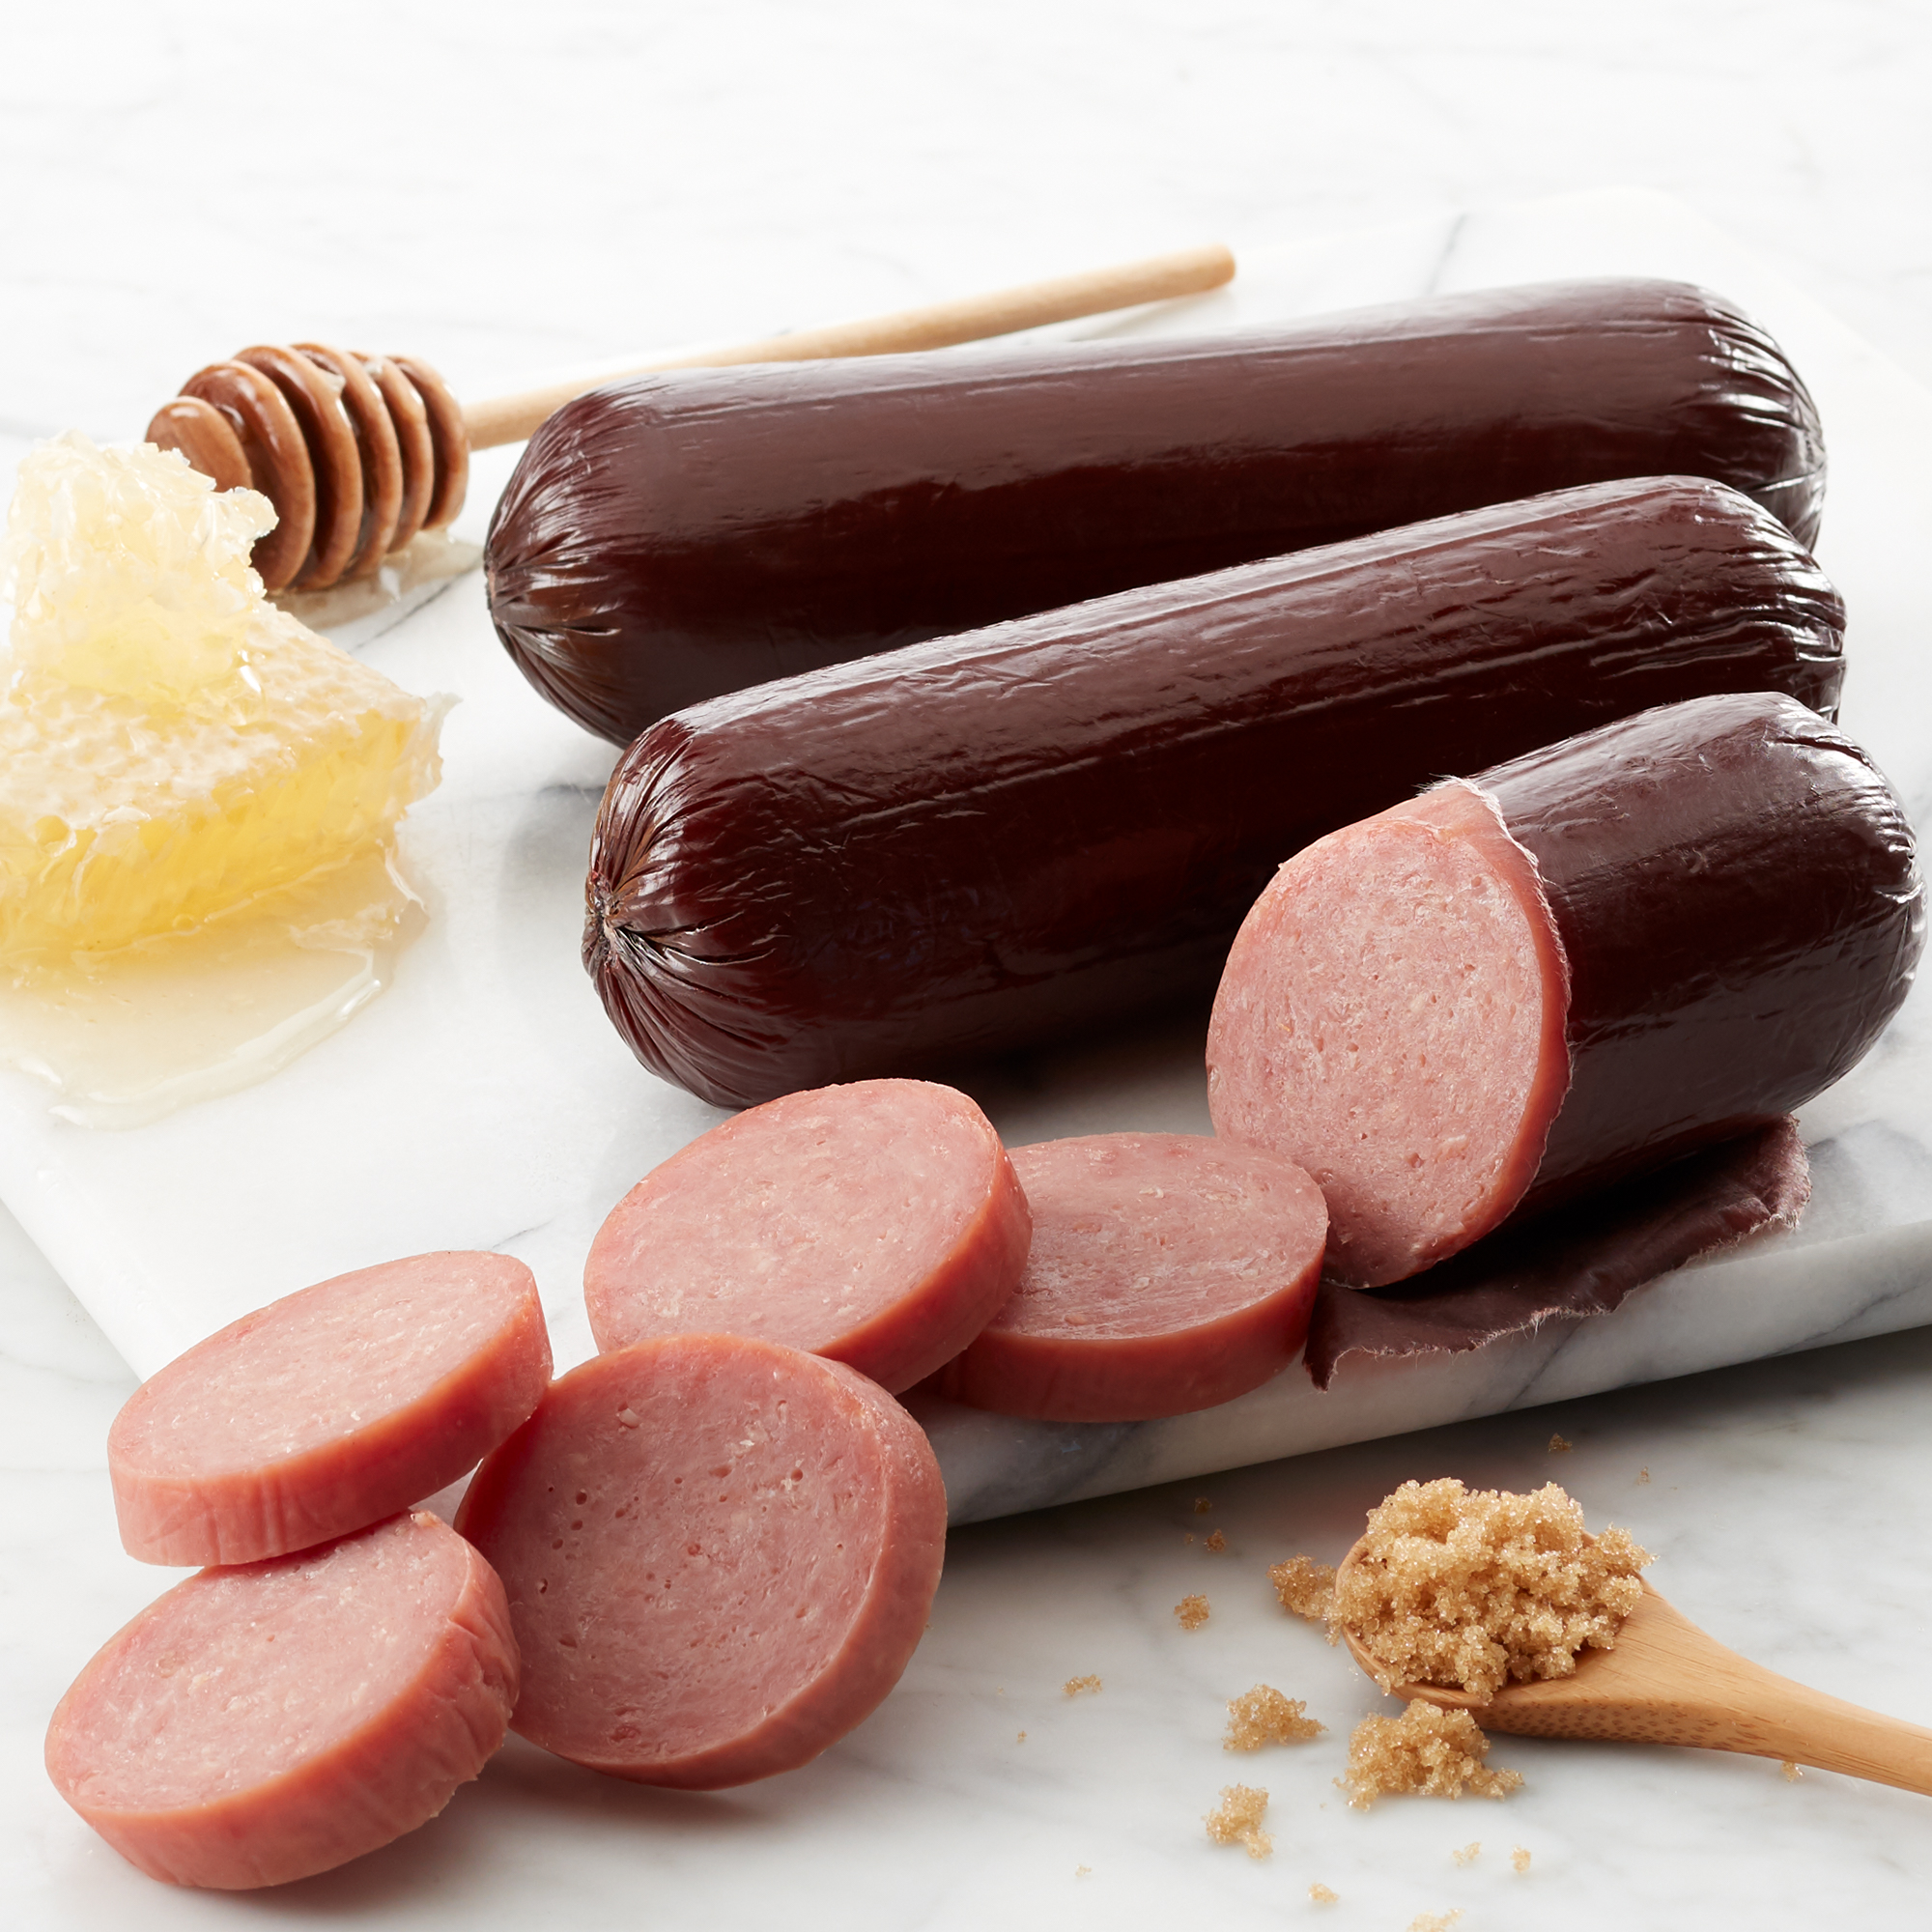 Abbyland Summer Sausage — North Country Cheese